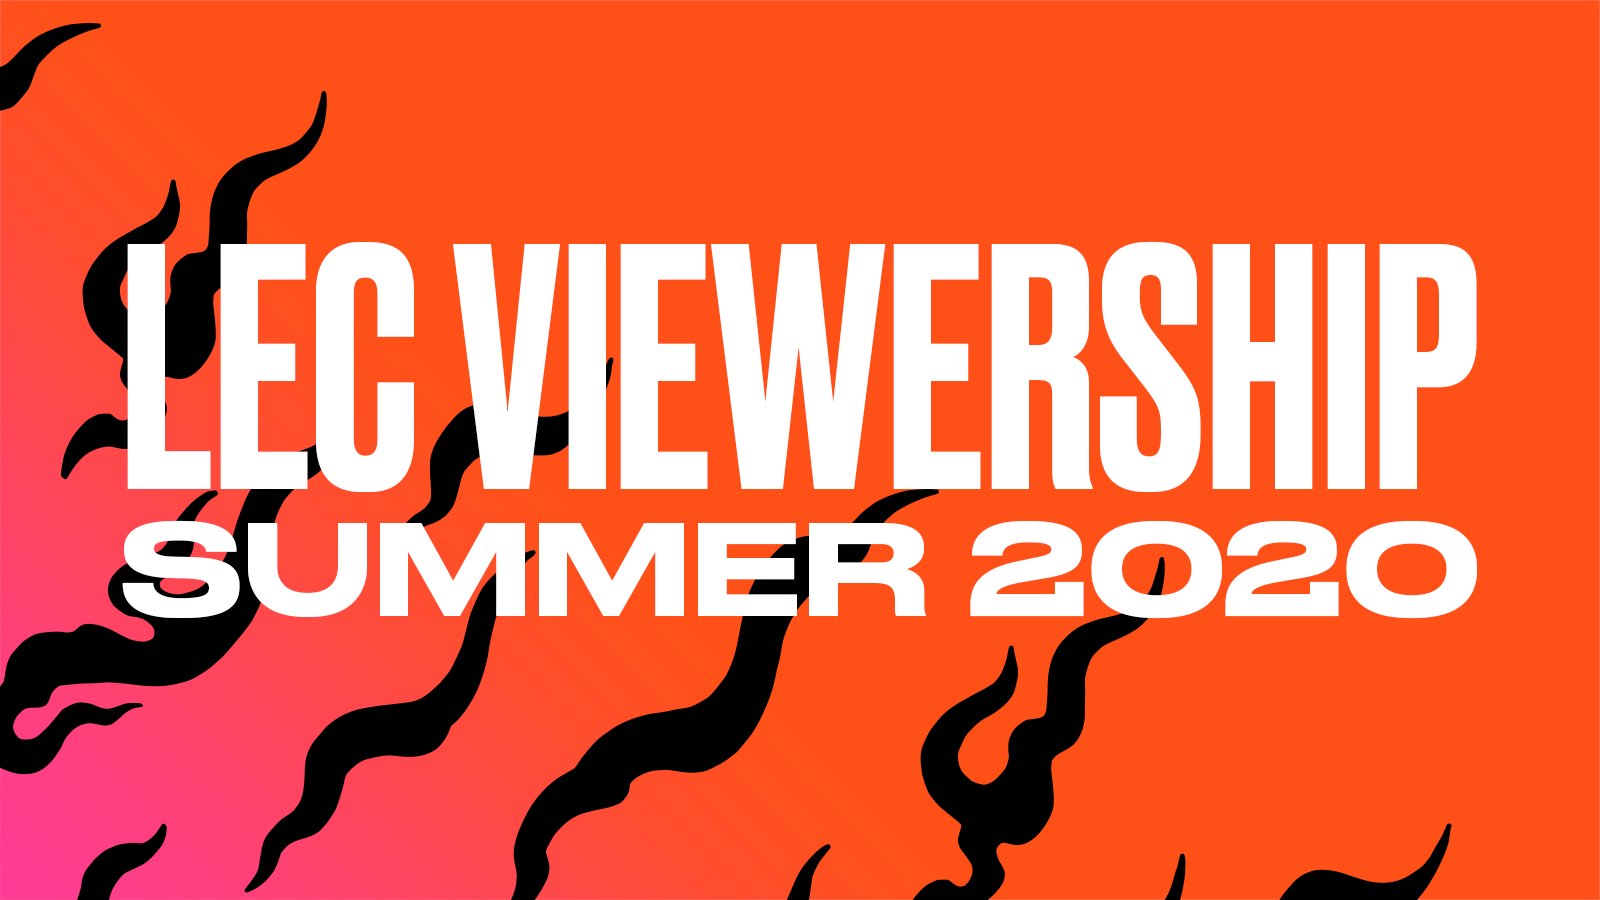 The LEC reported Record Viewership during the Summer Split